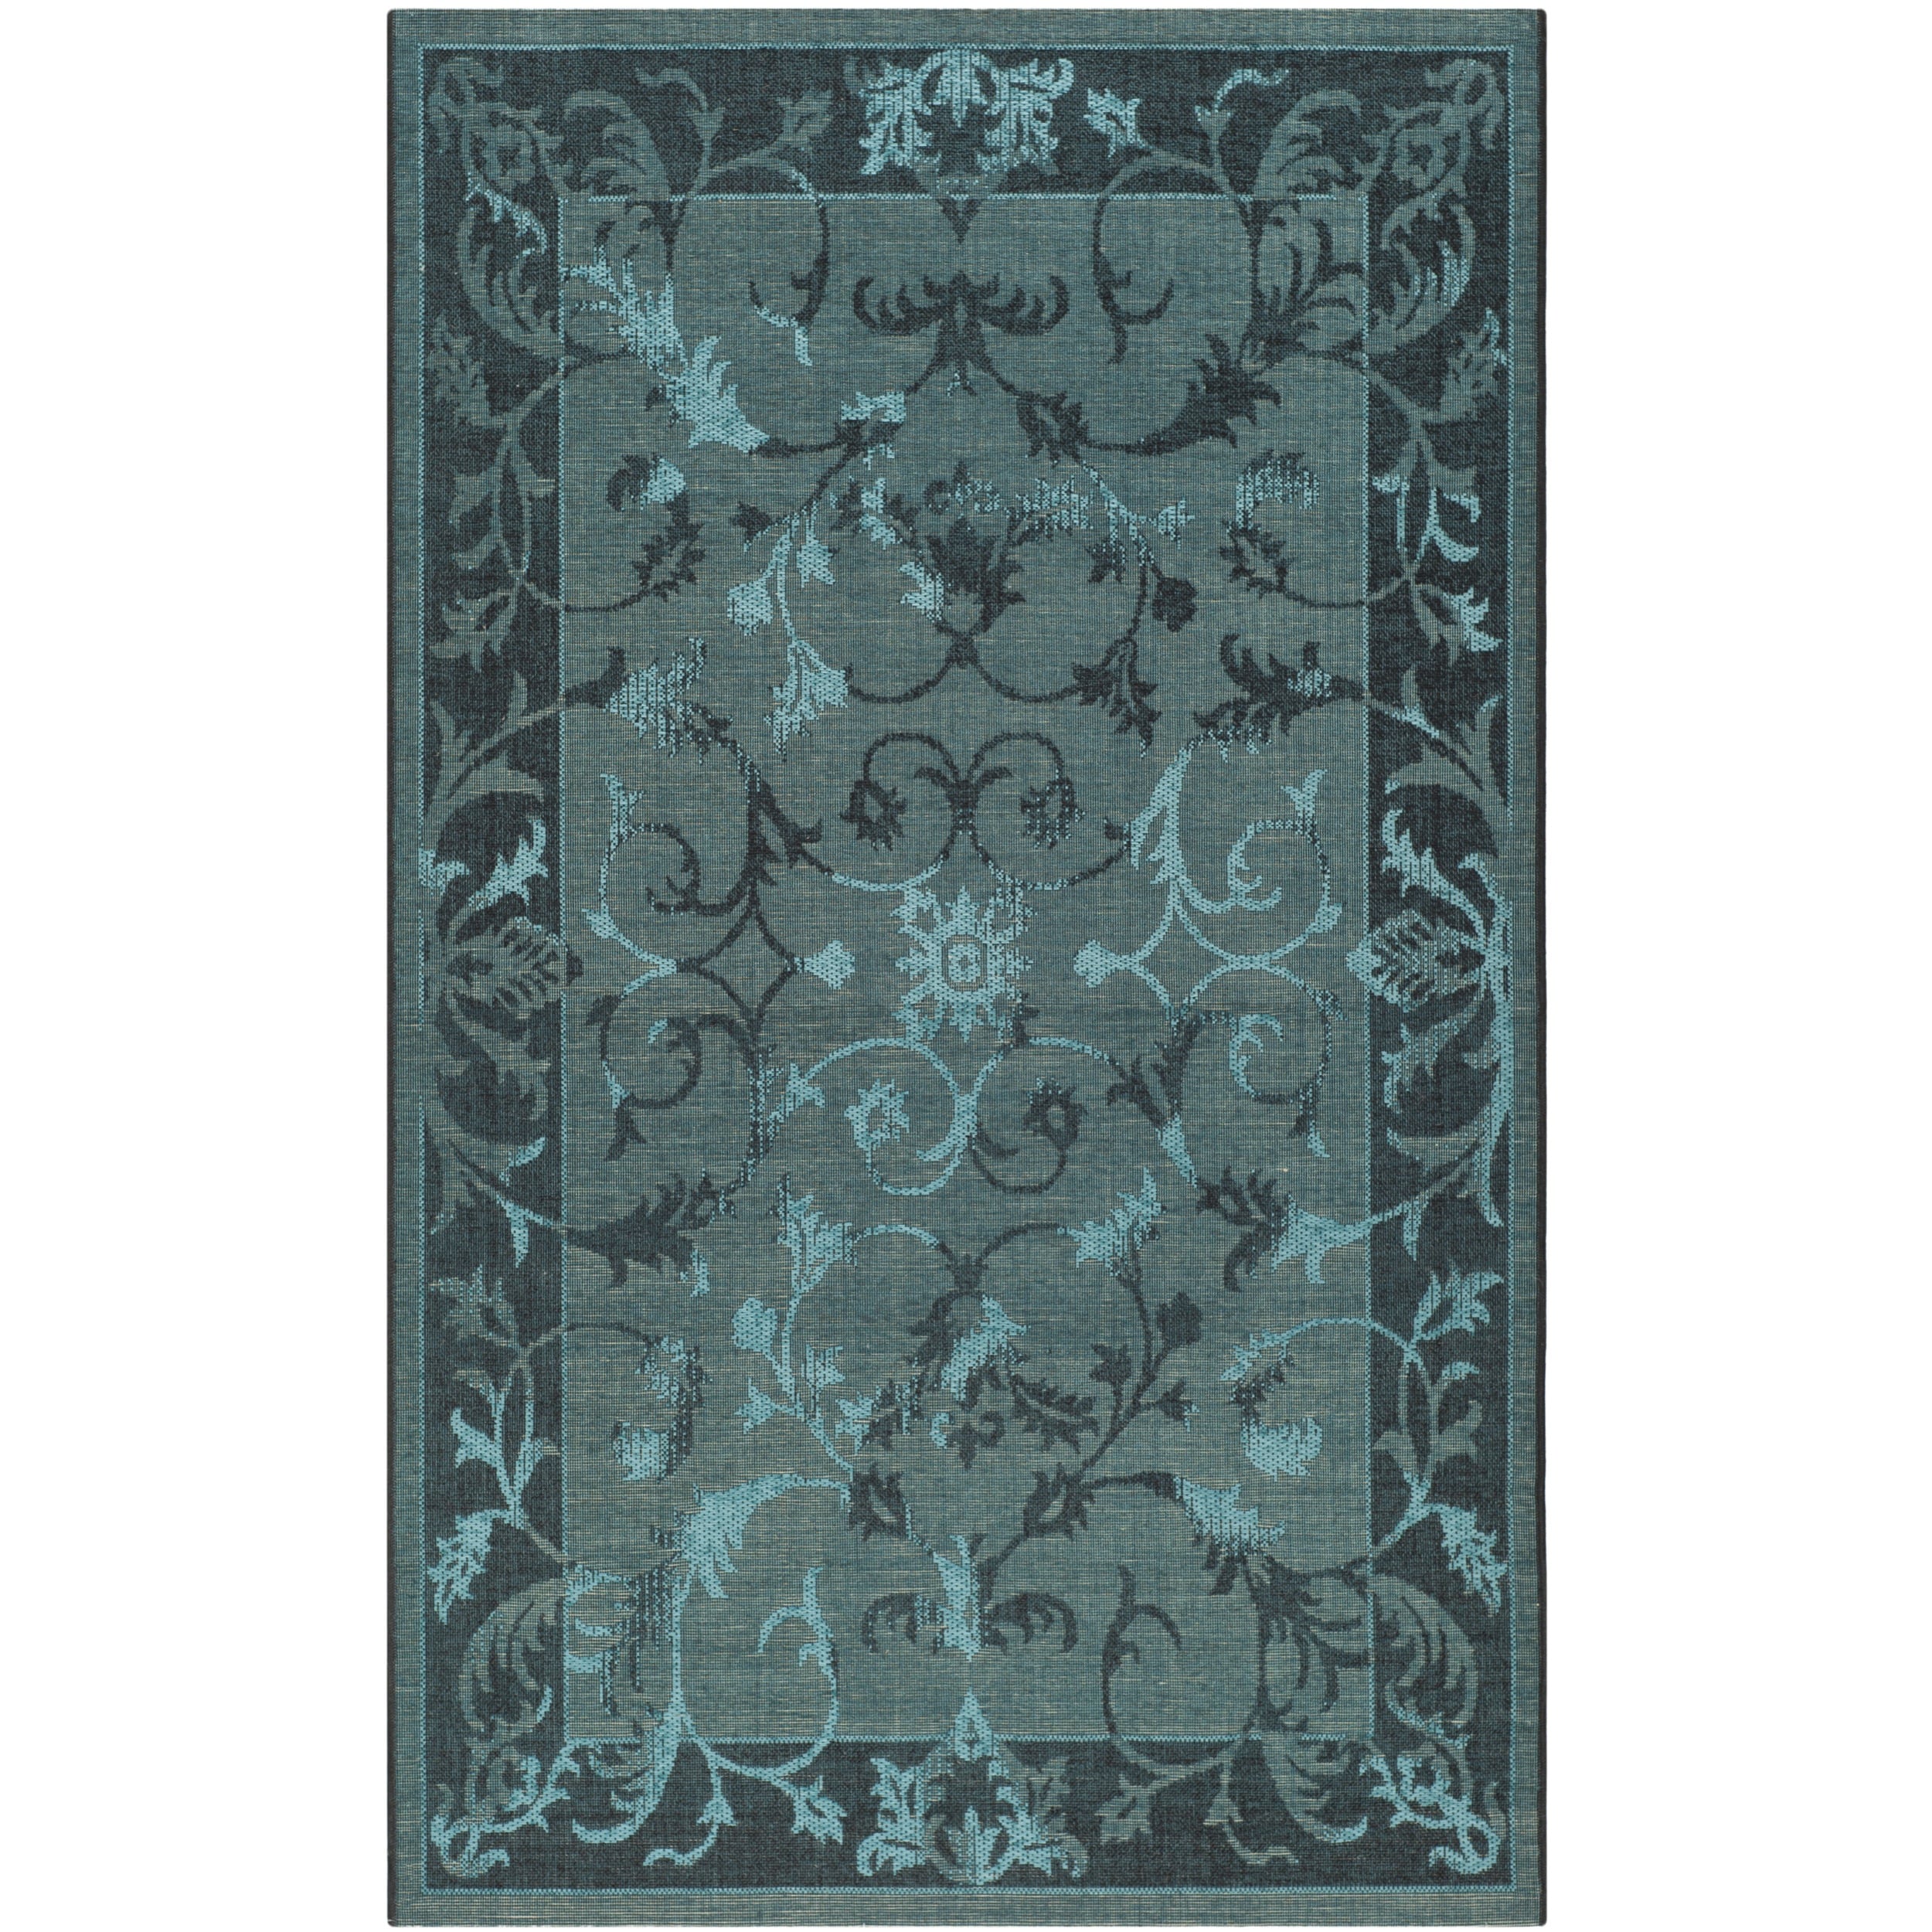 Safavieh Palazzo Transitional Black/turquoise Overdyed Chenille Rug (5 X 8)